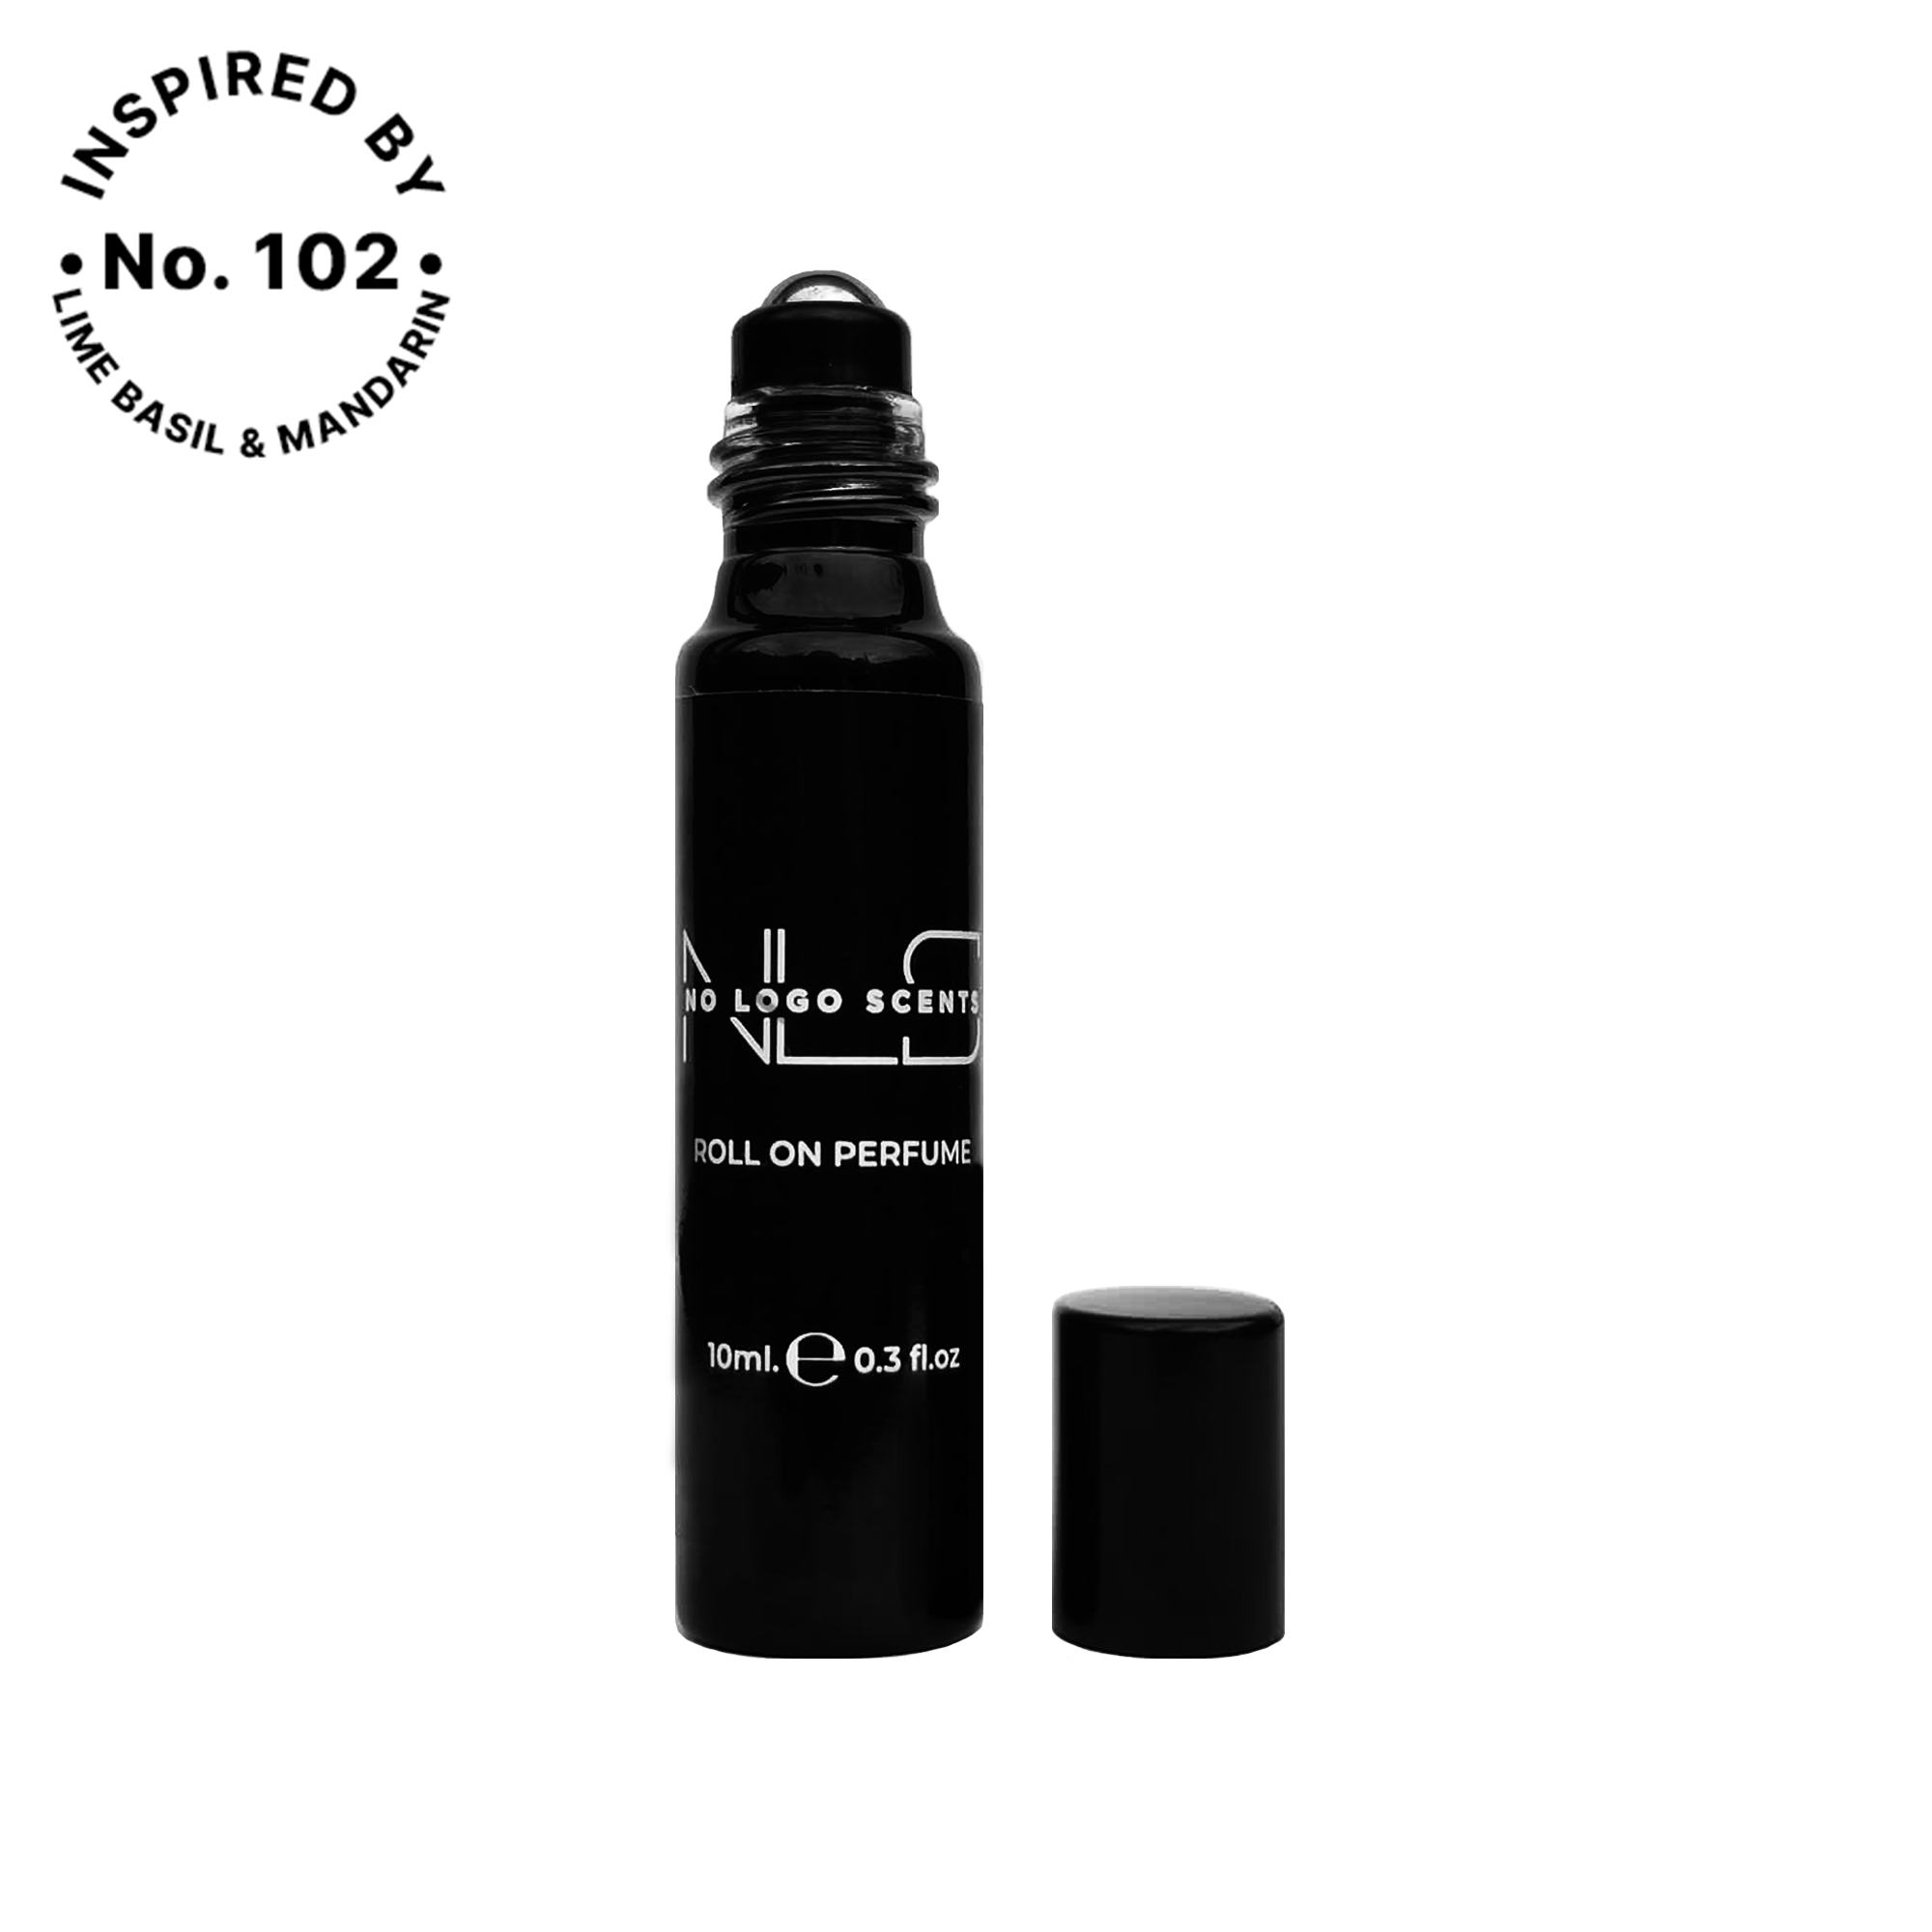 No.102 INSPIRED BY LIME BASIL & MANDARIN from category UNISEX ROLL ON PERFUMES - 1